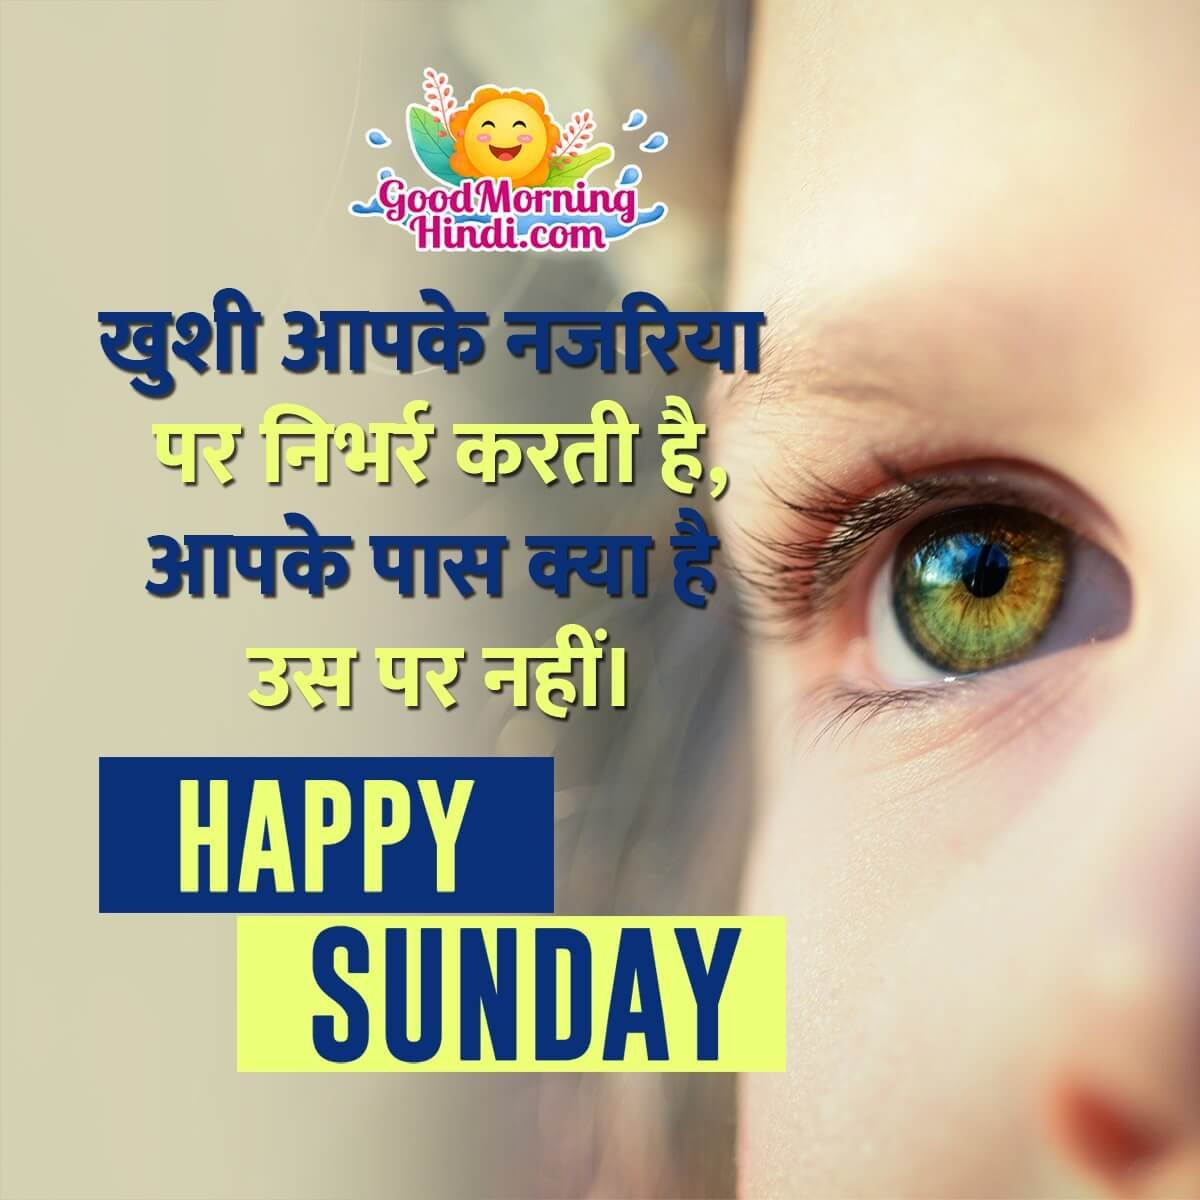 Good Morning Sunday Messages In Hindi - Good Morning Wishes ...